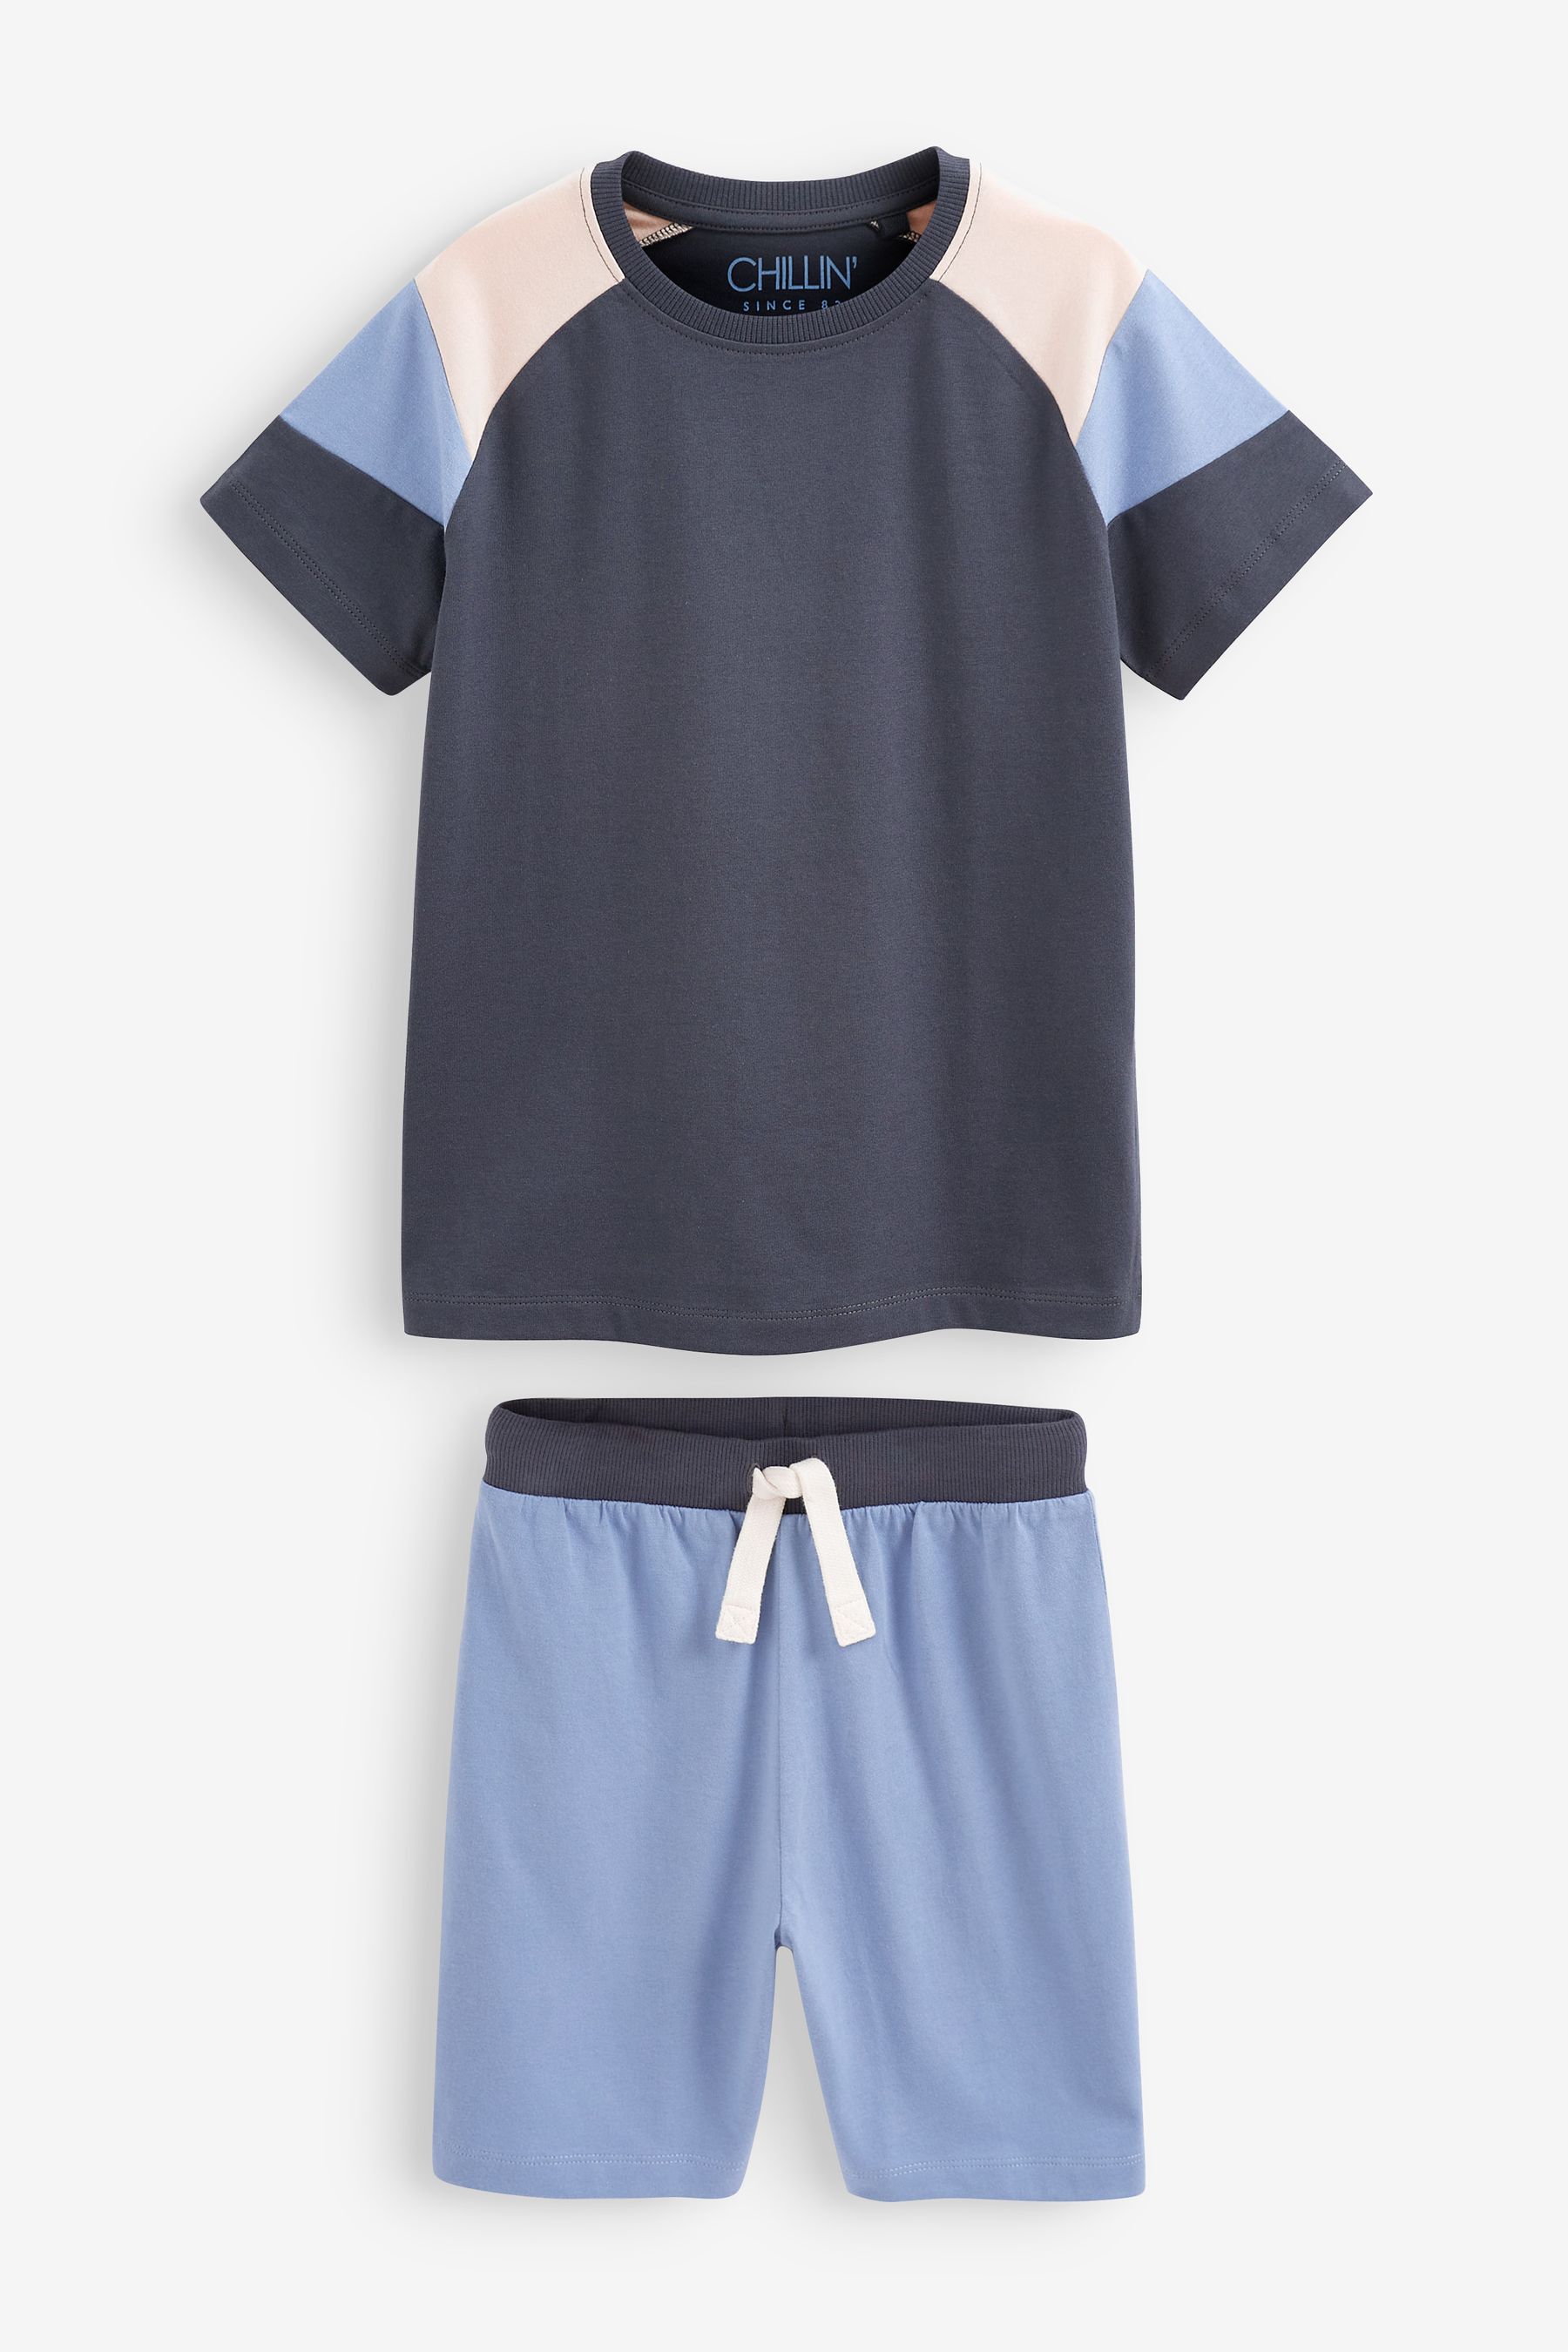 Buy Blue Short Pyjamas 3 Pack (3-16yrs) from the Next UK online shop